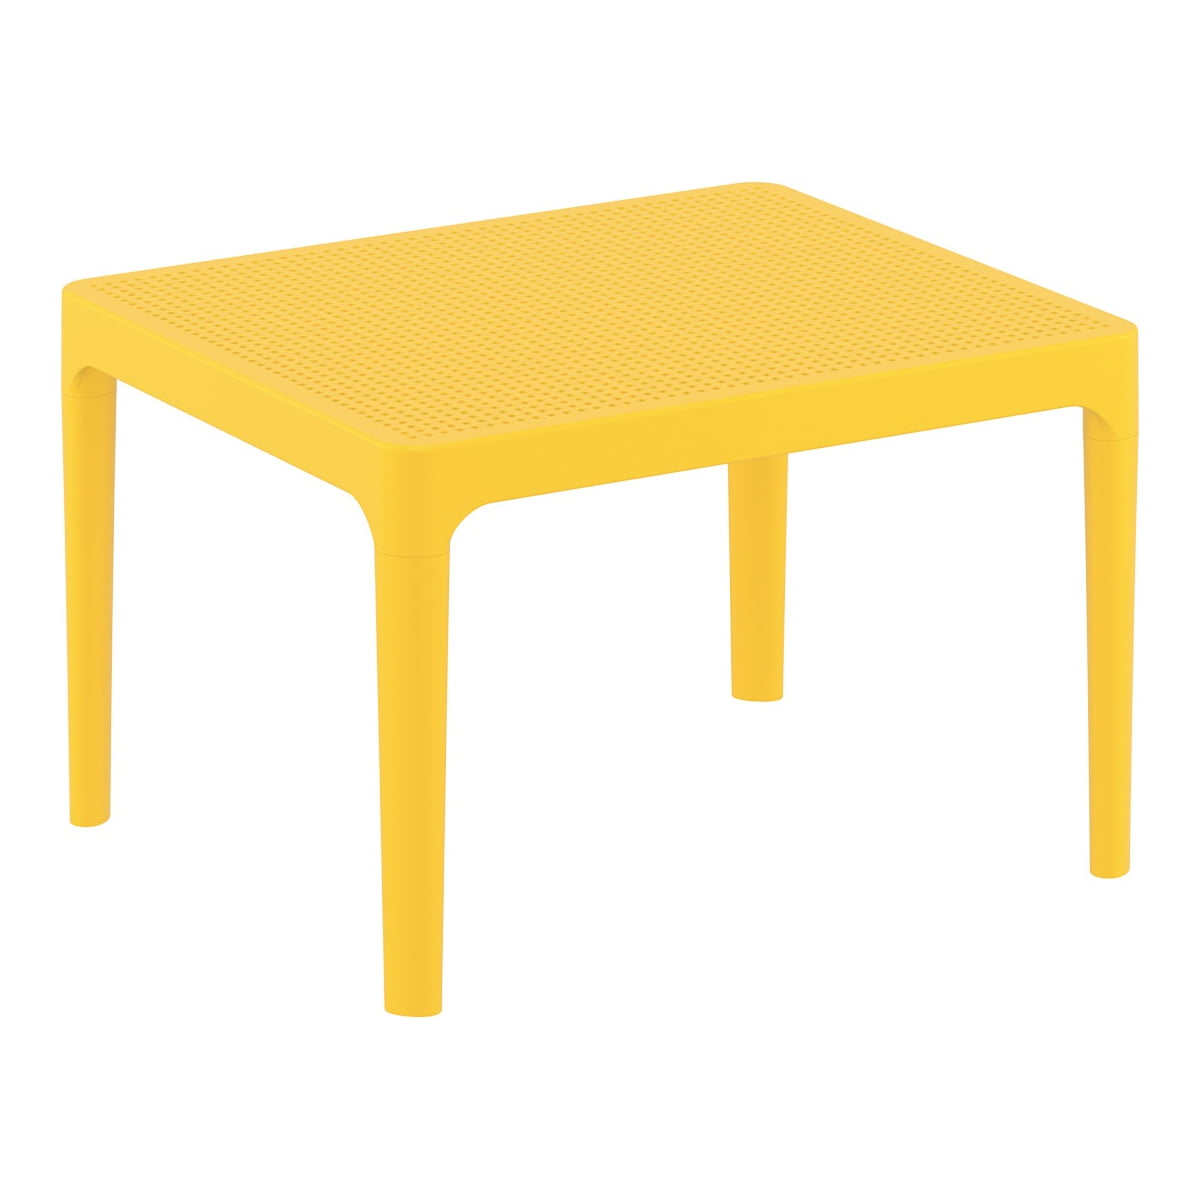 Neo 200109e Plastic Outdoor Side Table, Outdoor Plastic Side Tables